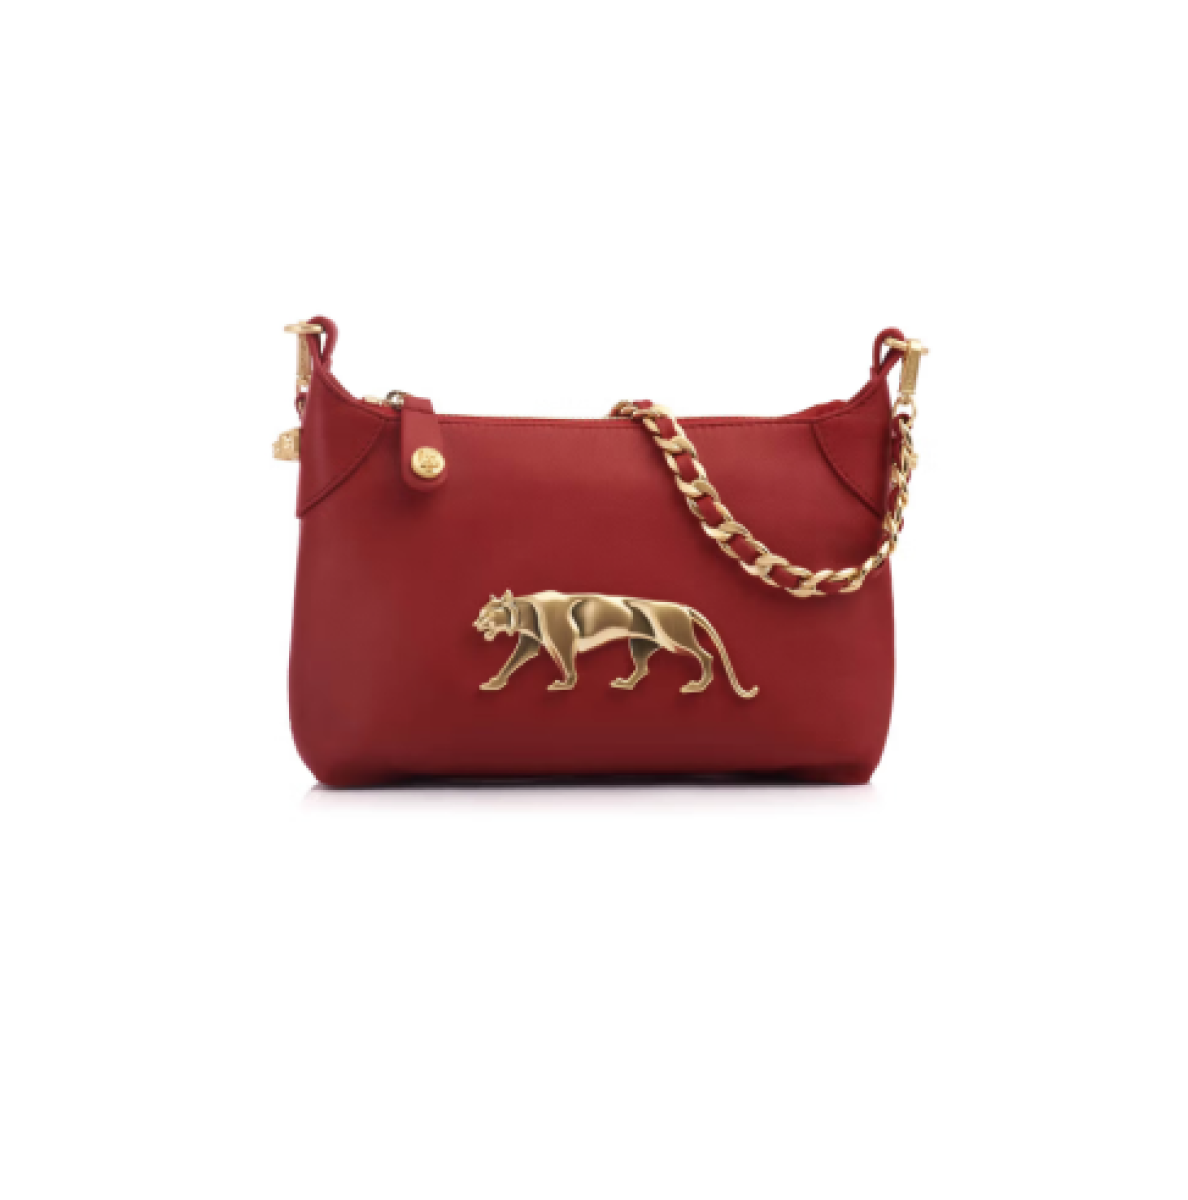 Sabyasachi Rouge Firpo Bag - The Grand Trunk